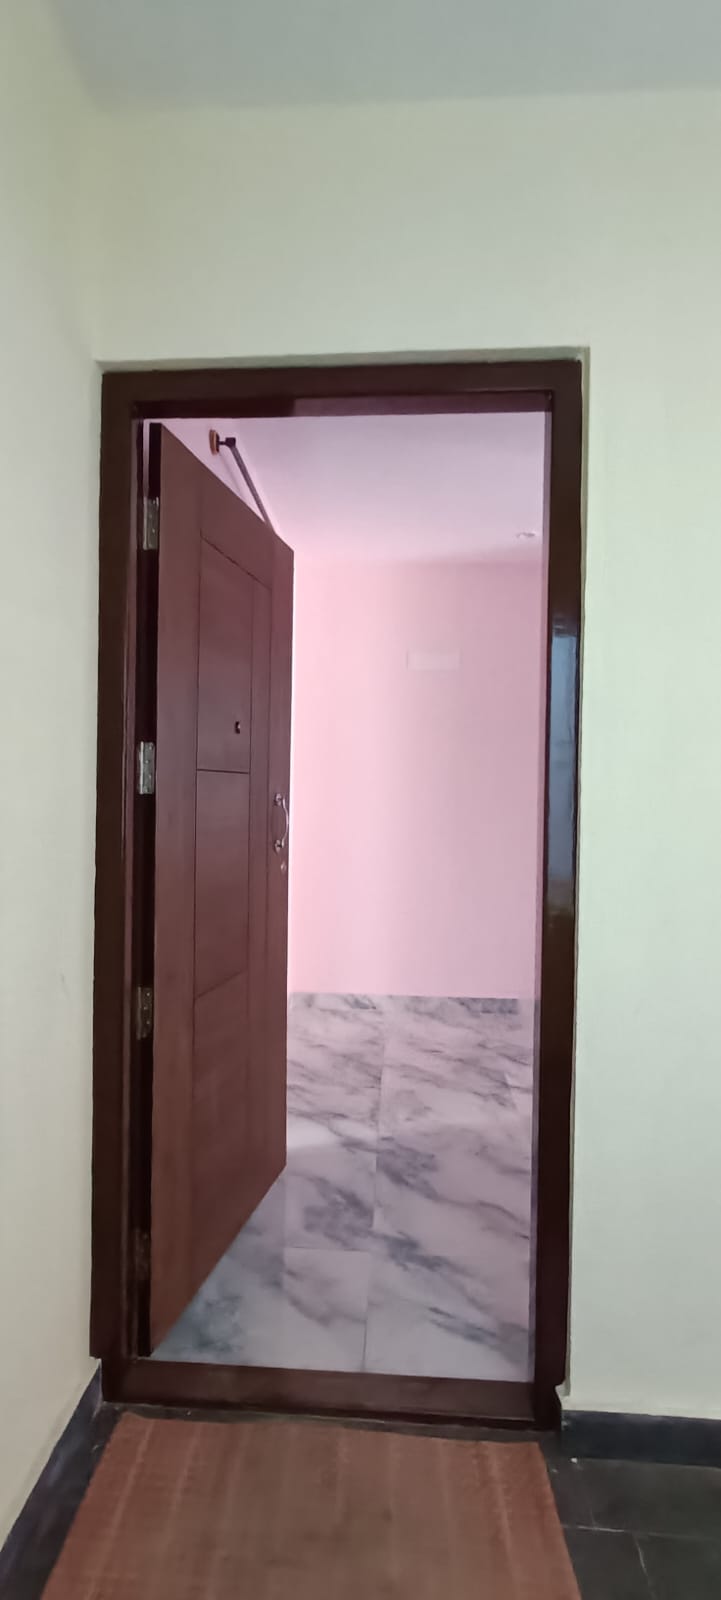 2 BHK Independent House for Lease Only at JAML2 - 3173 in Ulsoor